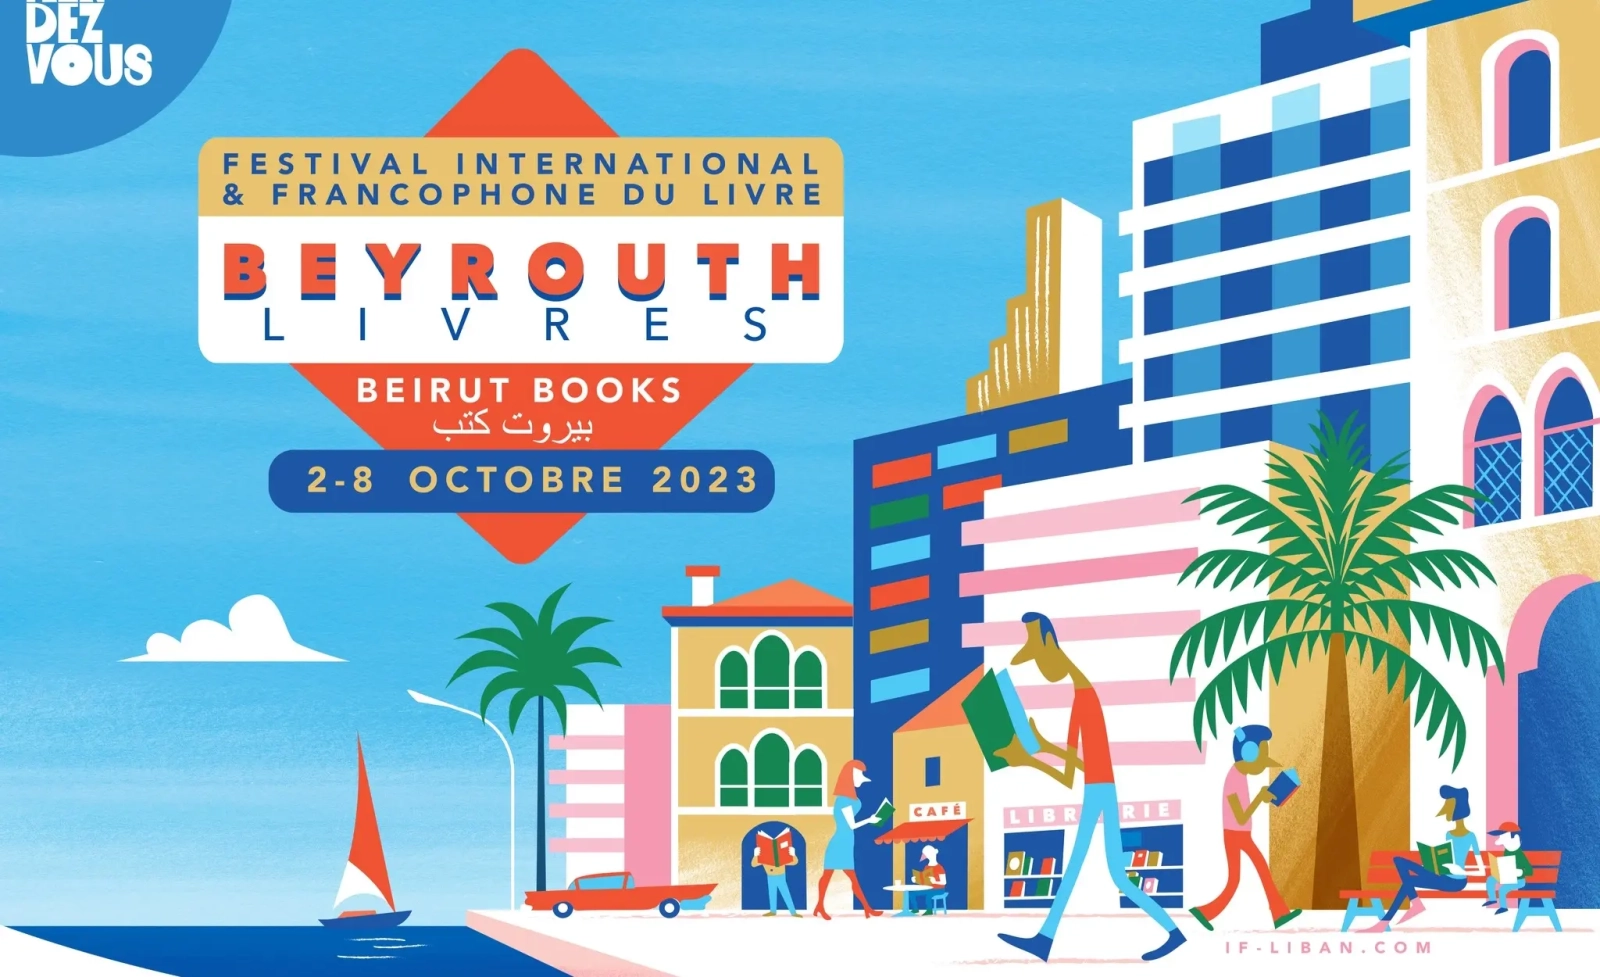 Festival Beyrouth Livres